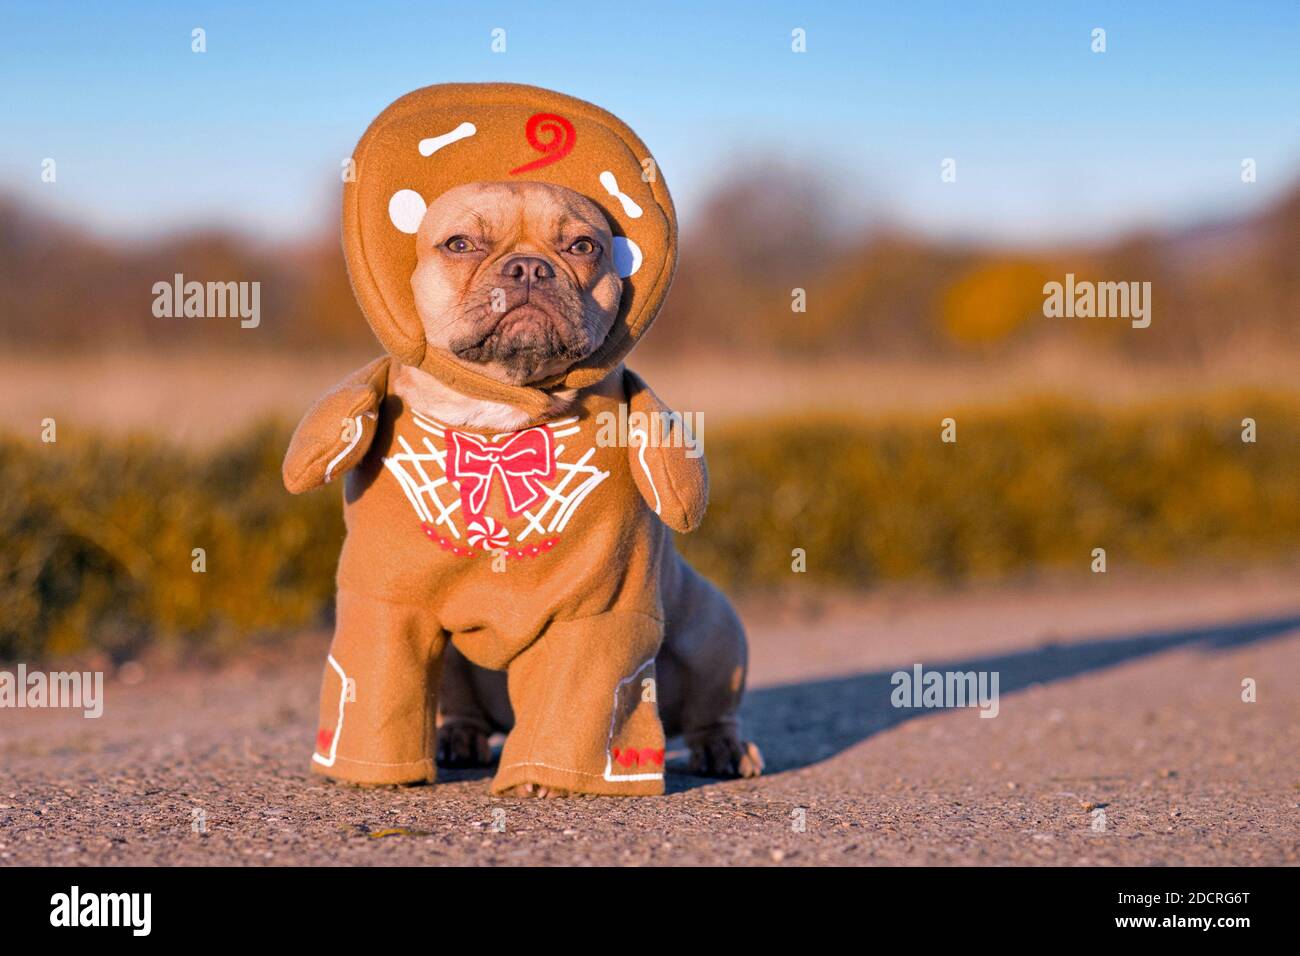 Red fawn French Bulldog dog dressed up with funny Christmas gingerbread full body costume with arms and hat Stock Photo